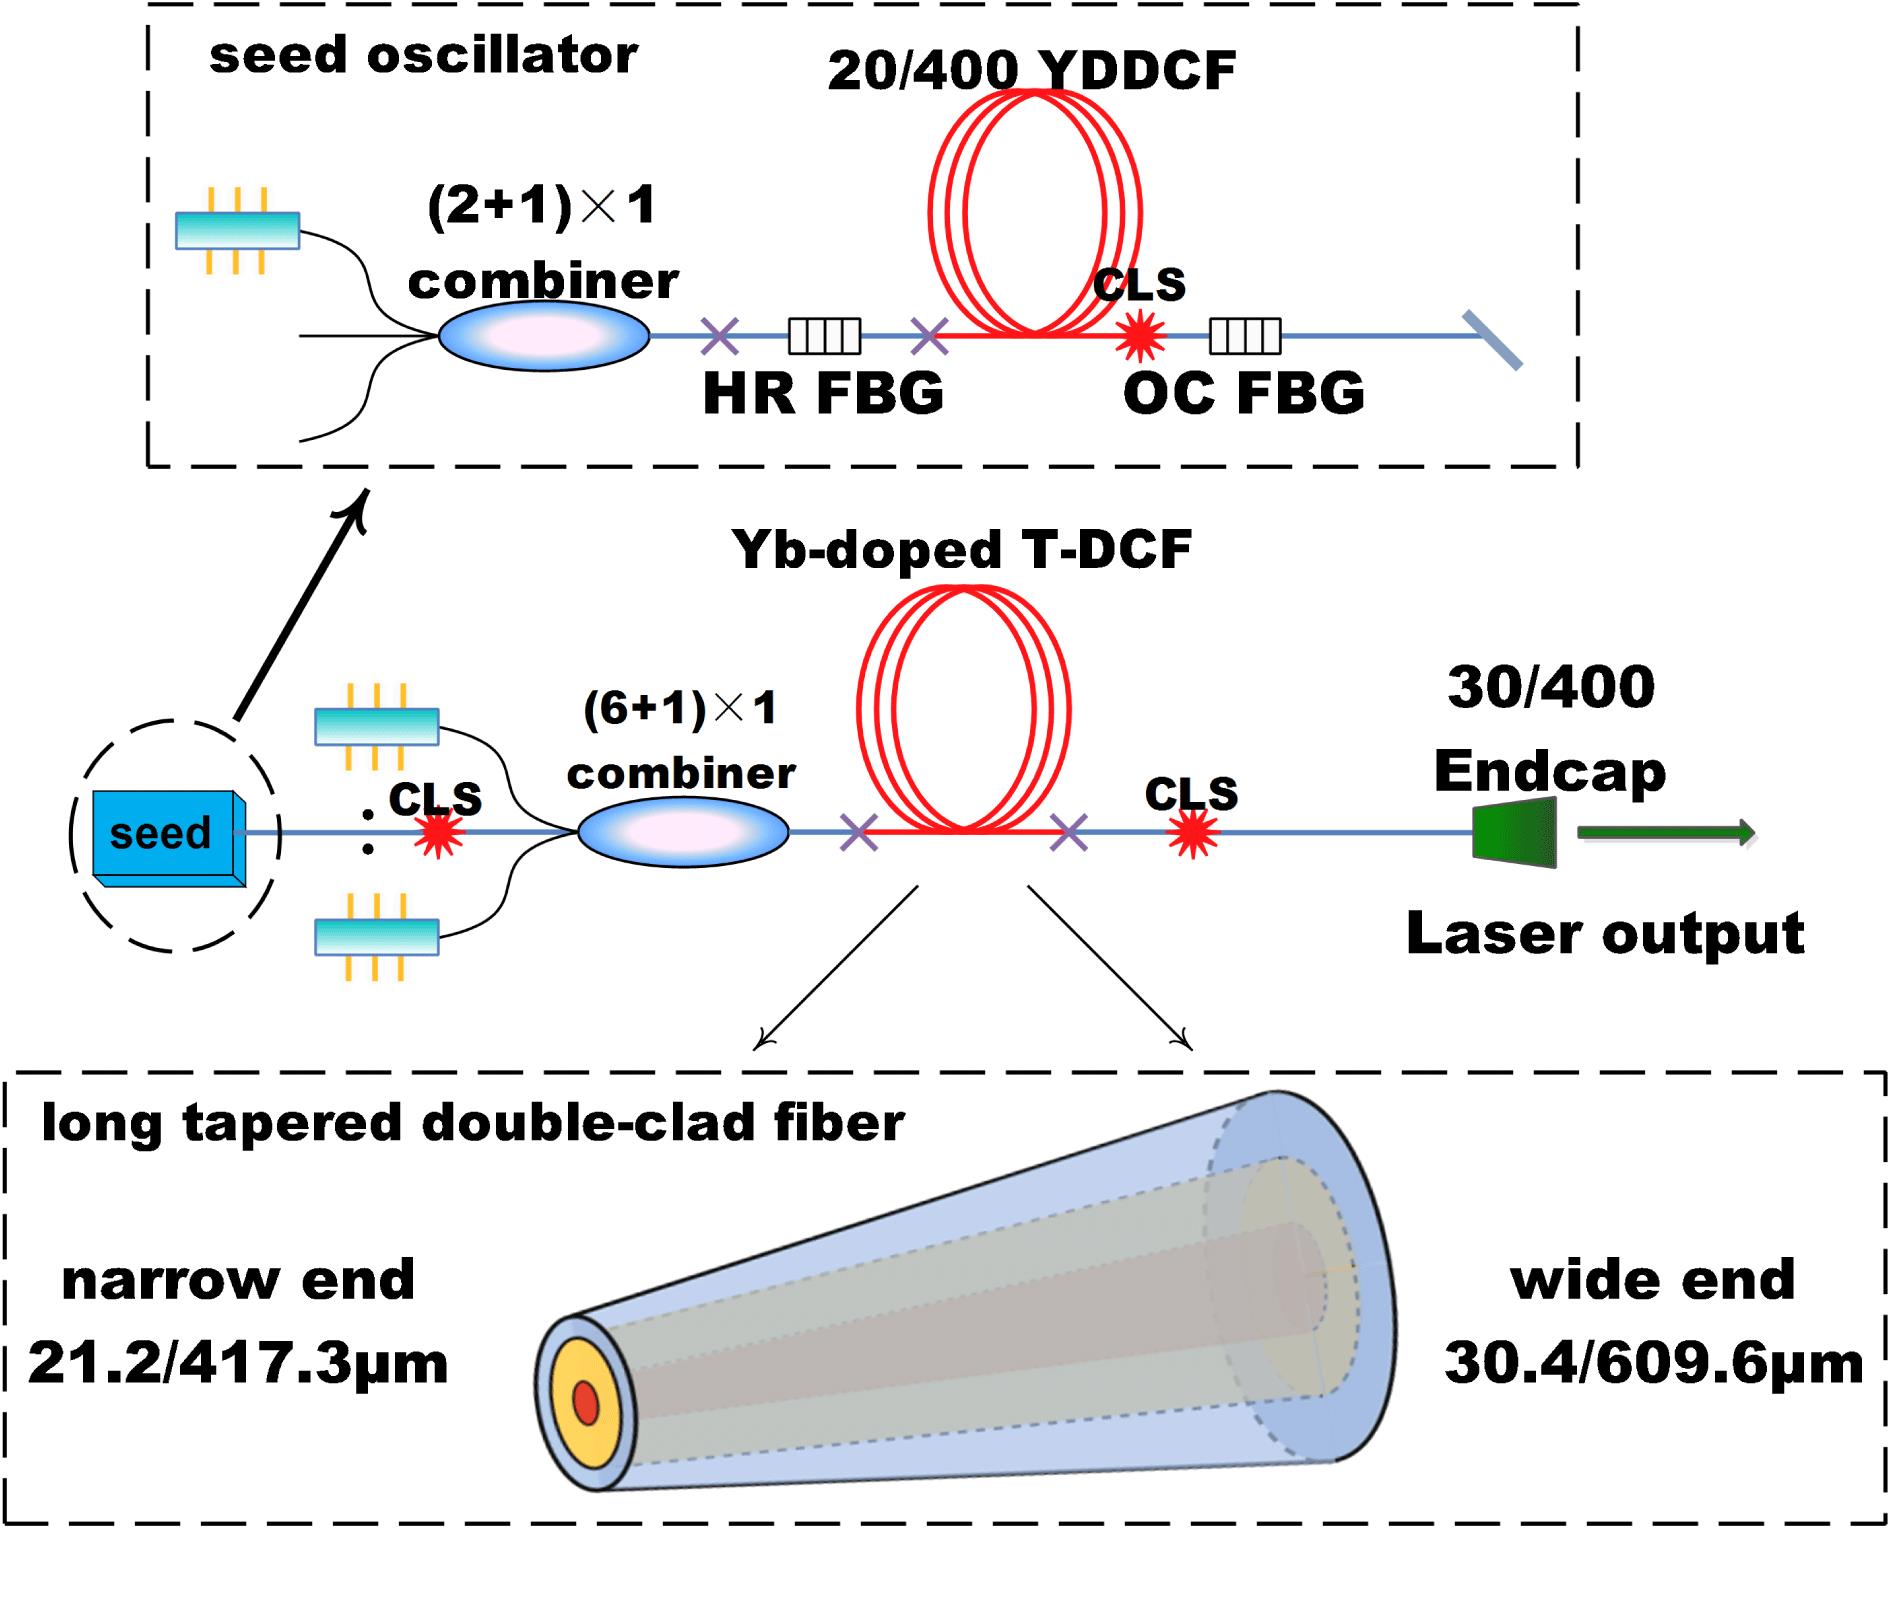 Schematic of the Yb-doped T-DCF based fiber amplifier.